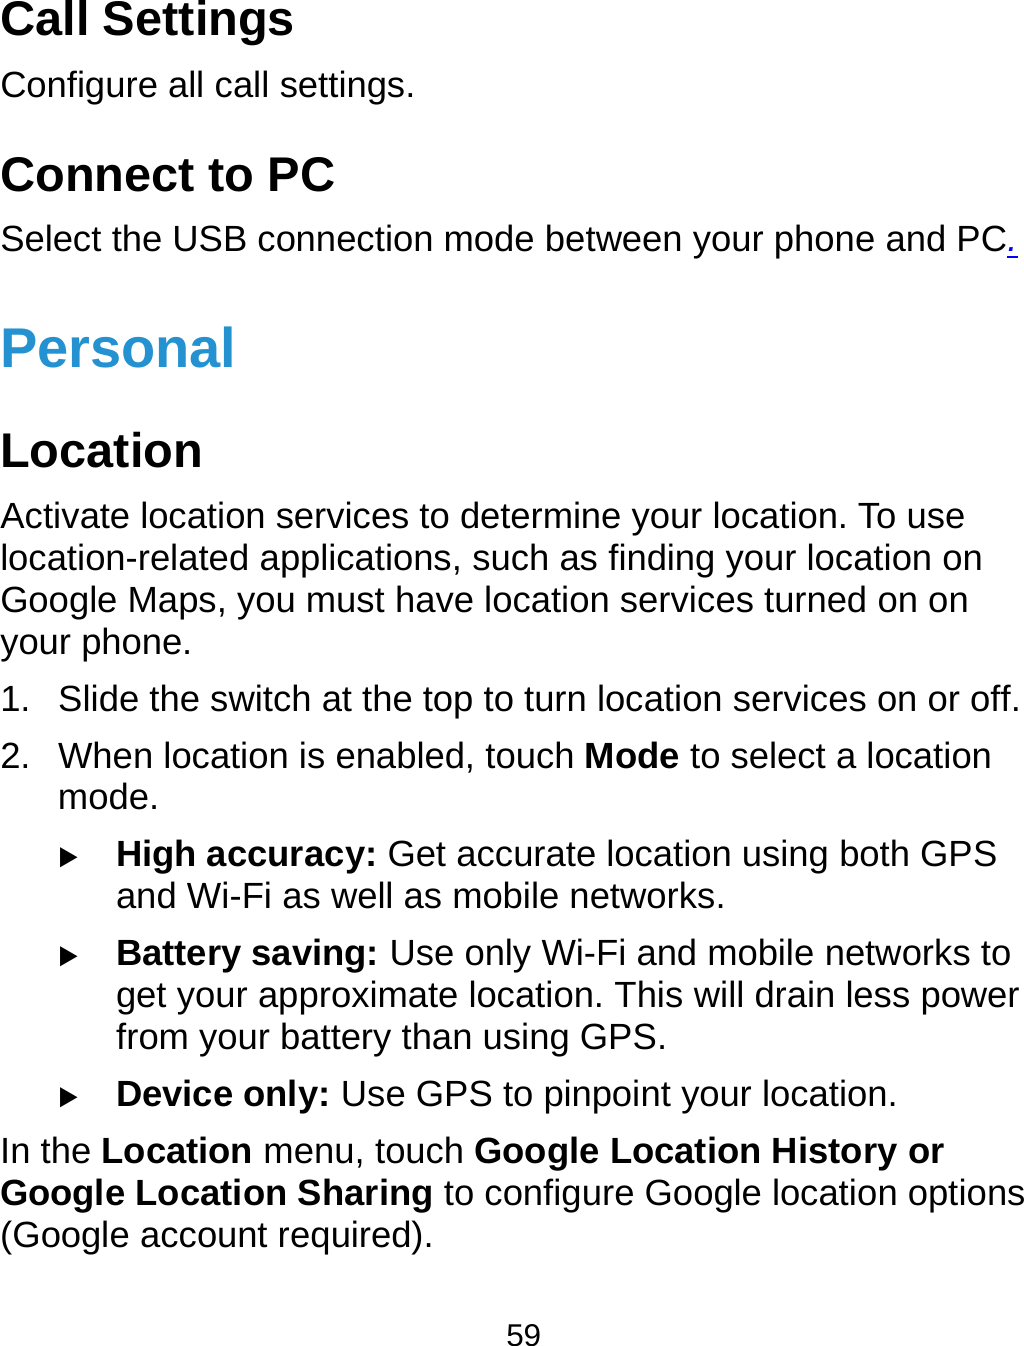  59 Call Settings   Configure all call settings.       Connect to PC Select the USB connection mode between your phone and PC. Personal Location Activate location services to determine your location. To use location-related applications, such as finding your location on Google Maps, you must have location services turned on on   your phone. 1.  Slide the switch at the top to turn location services on or off. 2.  When location is enabled, touch Mode to select a location mode.  High accuracy: Get accurate location using both GPS and Wi-Fi as well as mobile networks.  Battery saving: Use only Wi-Fi and mobile networks to get your approximate location. This will drain less power from your battery than using GPS.  Device only: Use GPS to pinpoint your location. In the Location menu, touch Google Location History or Google Location Sharing to configure Google location options (Google account required). 